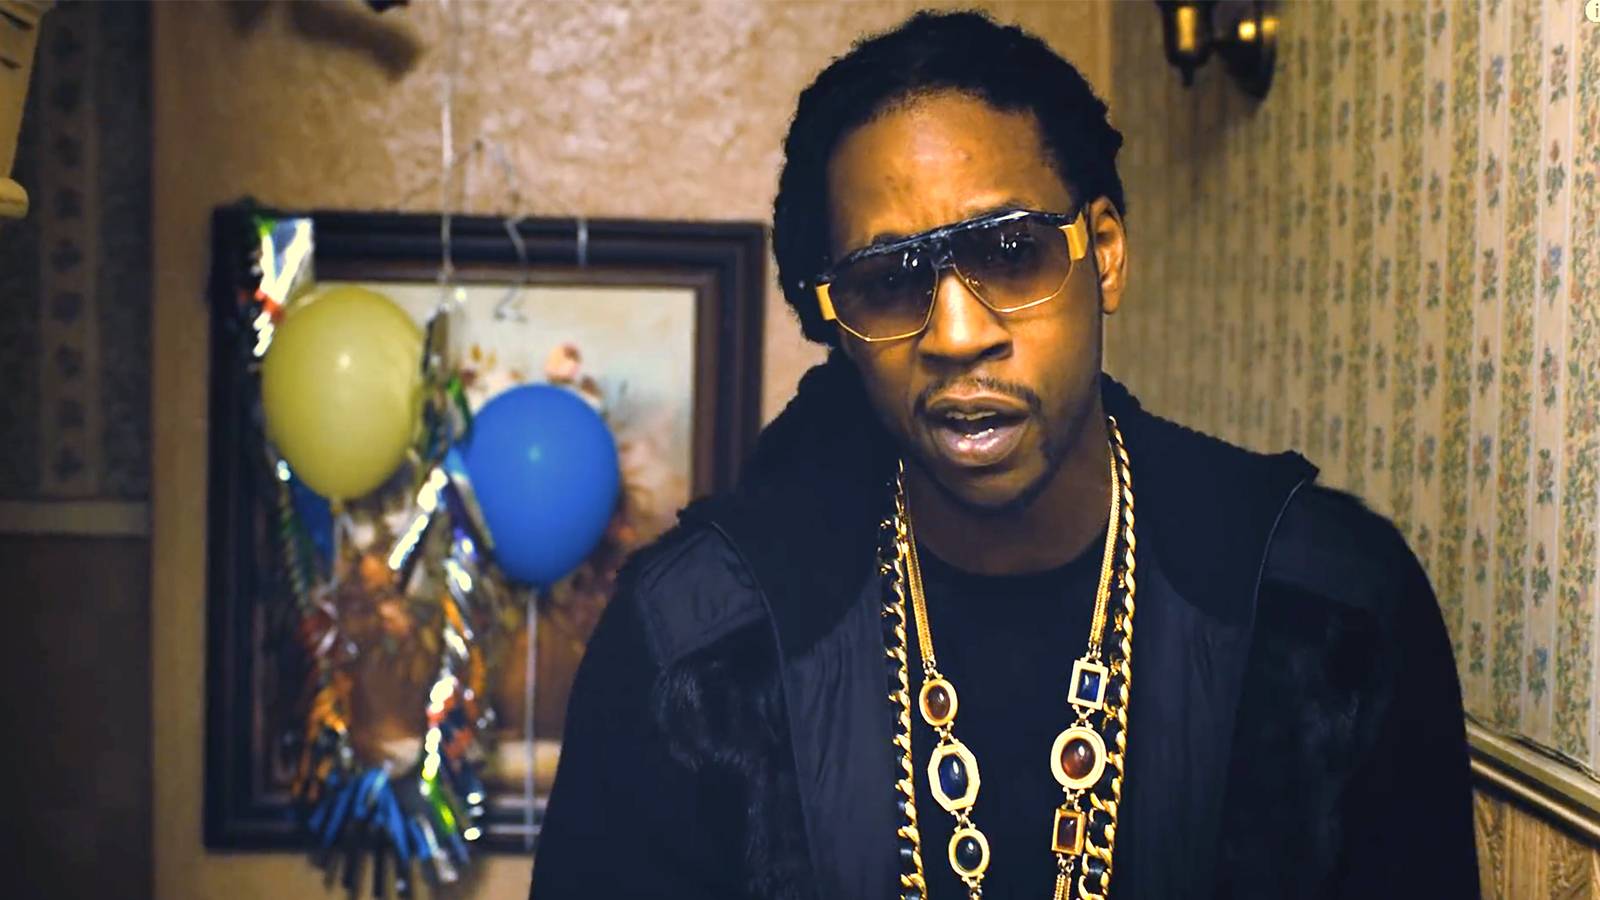 The 2 Chainz Warm Up  - The College Park native has created hip hop anthems that are fun for everyone to listen to! He keeps the ball rolling with his hype tracks, putting you in the head space to get hype!&nbsp;(Photo: The Island Def Jam Music Group)